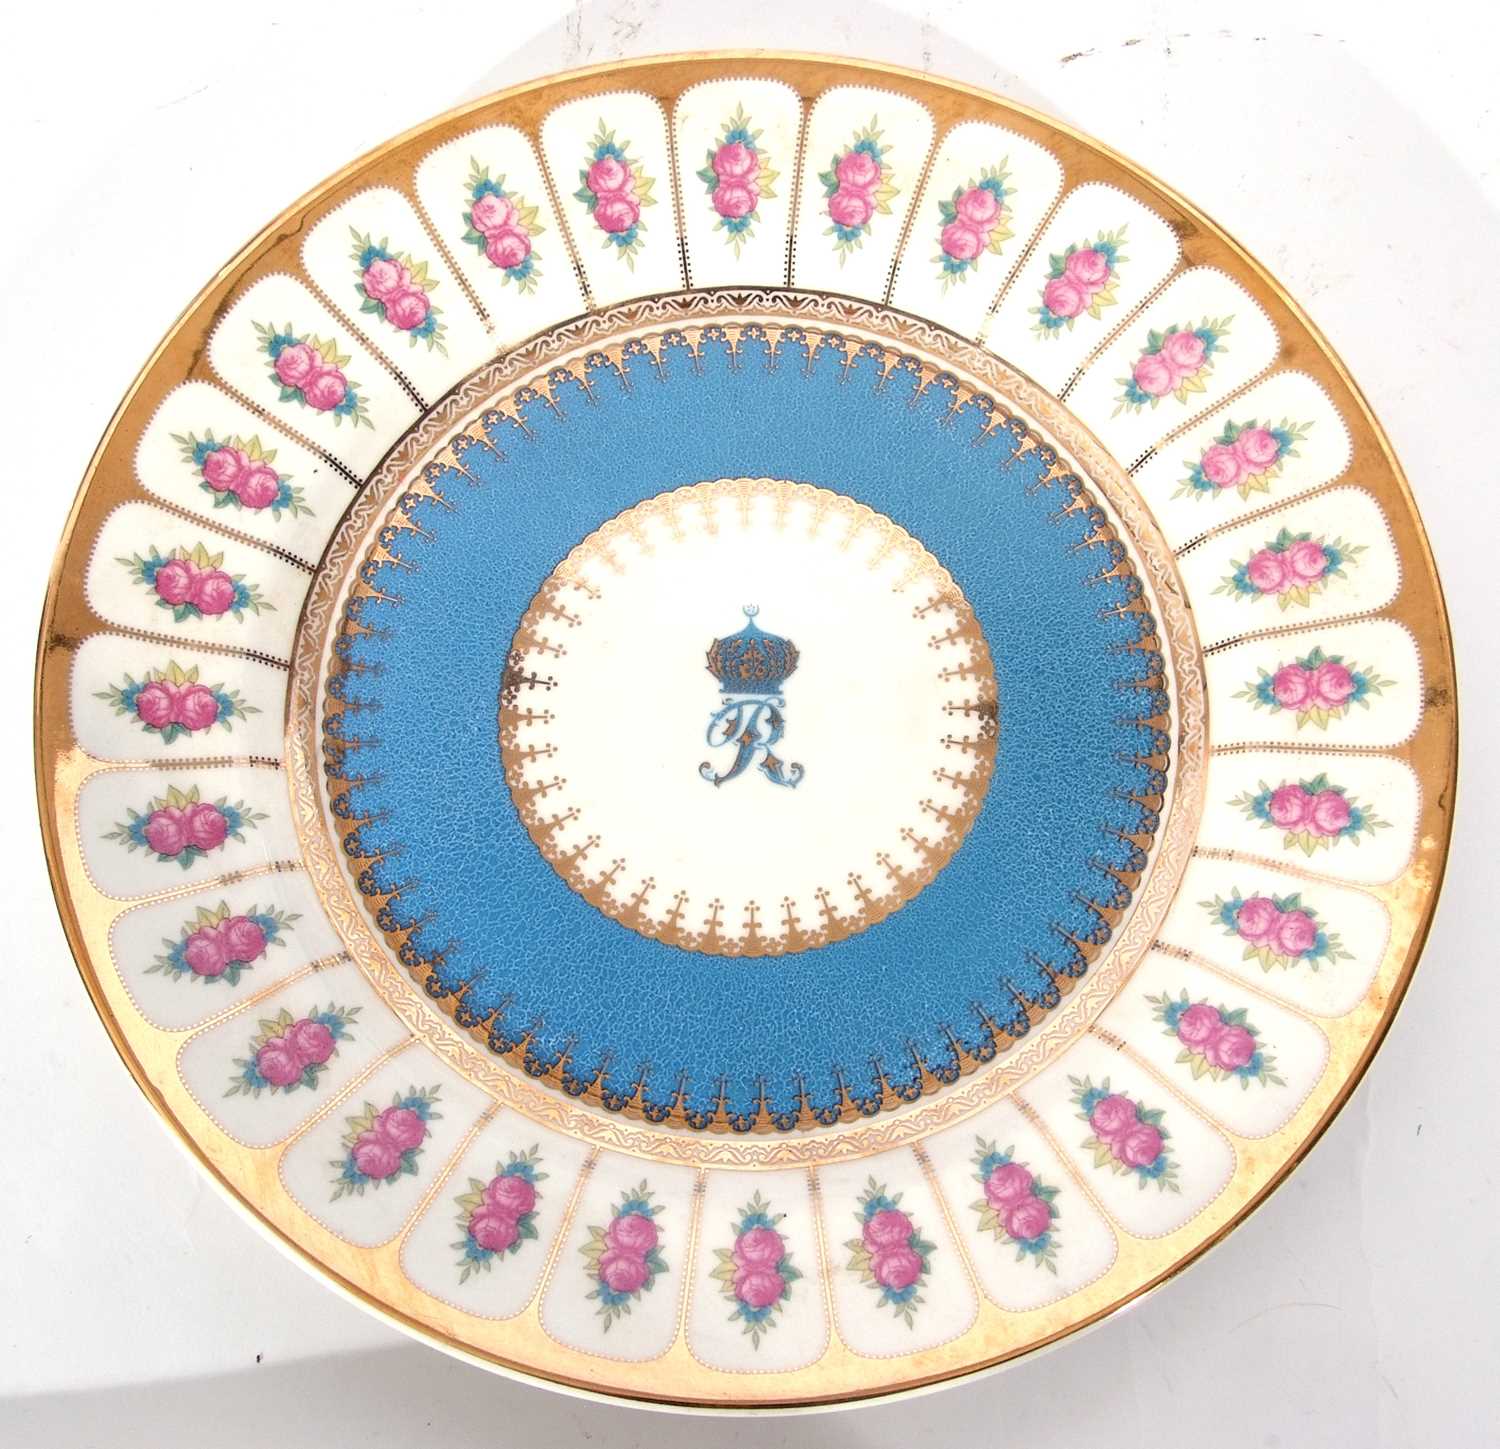 Set of 12 rare Royal Worcester plates commissioned for the Nawab Hamid Ali Khan of Rampur, - Image 2 of 6